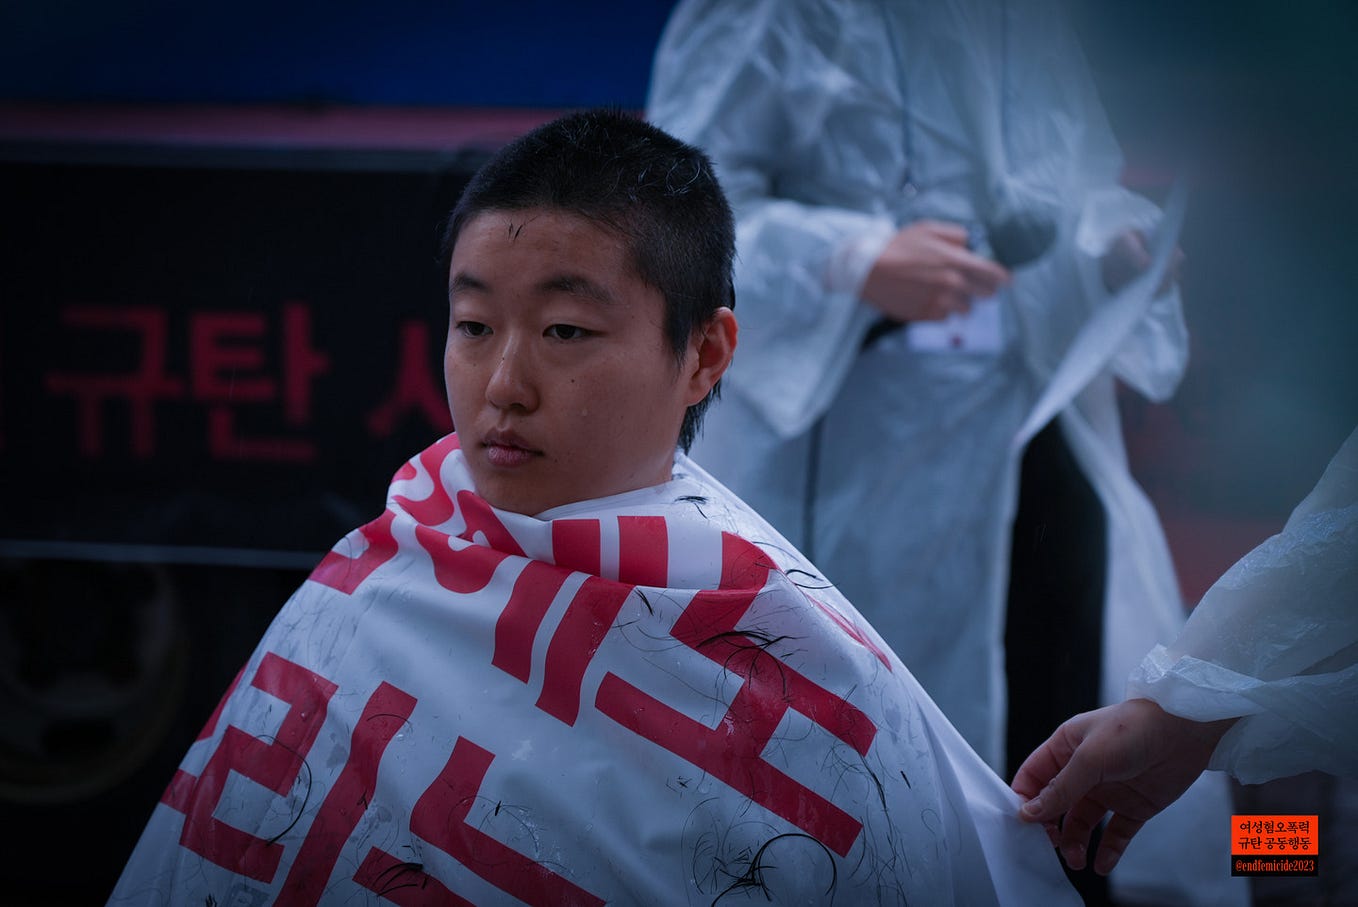 A South Korean woman shaving her hair in a protest